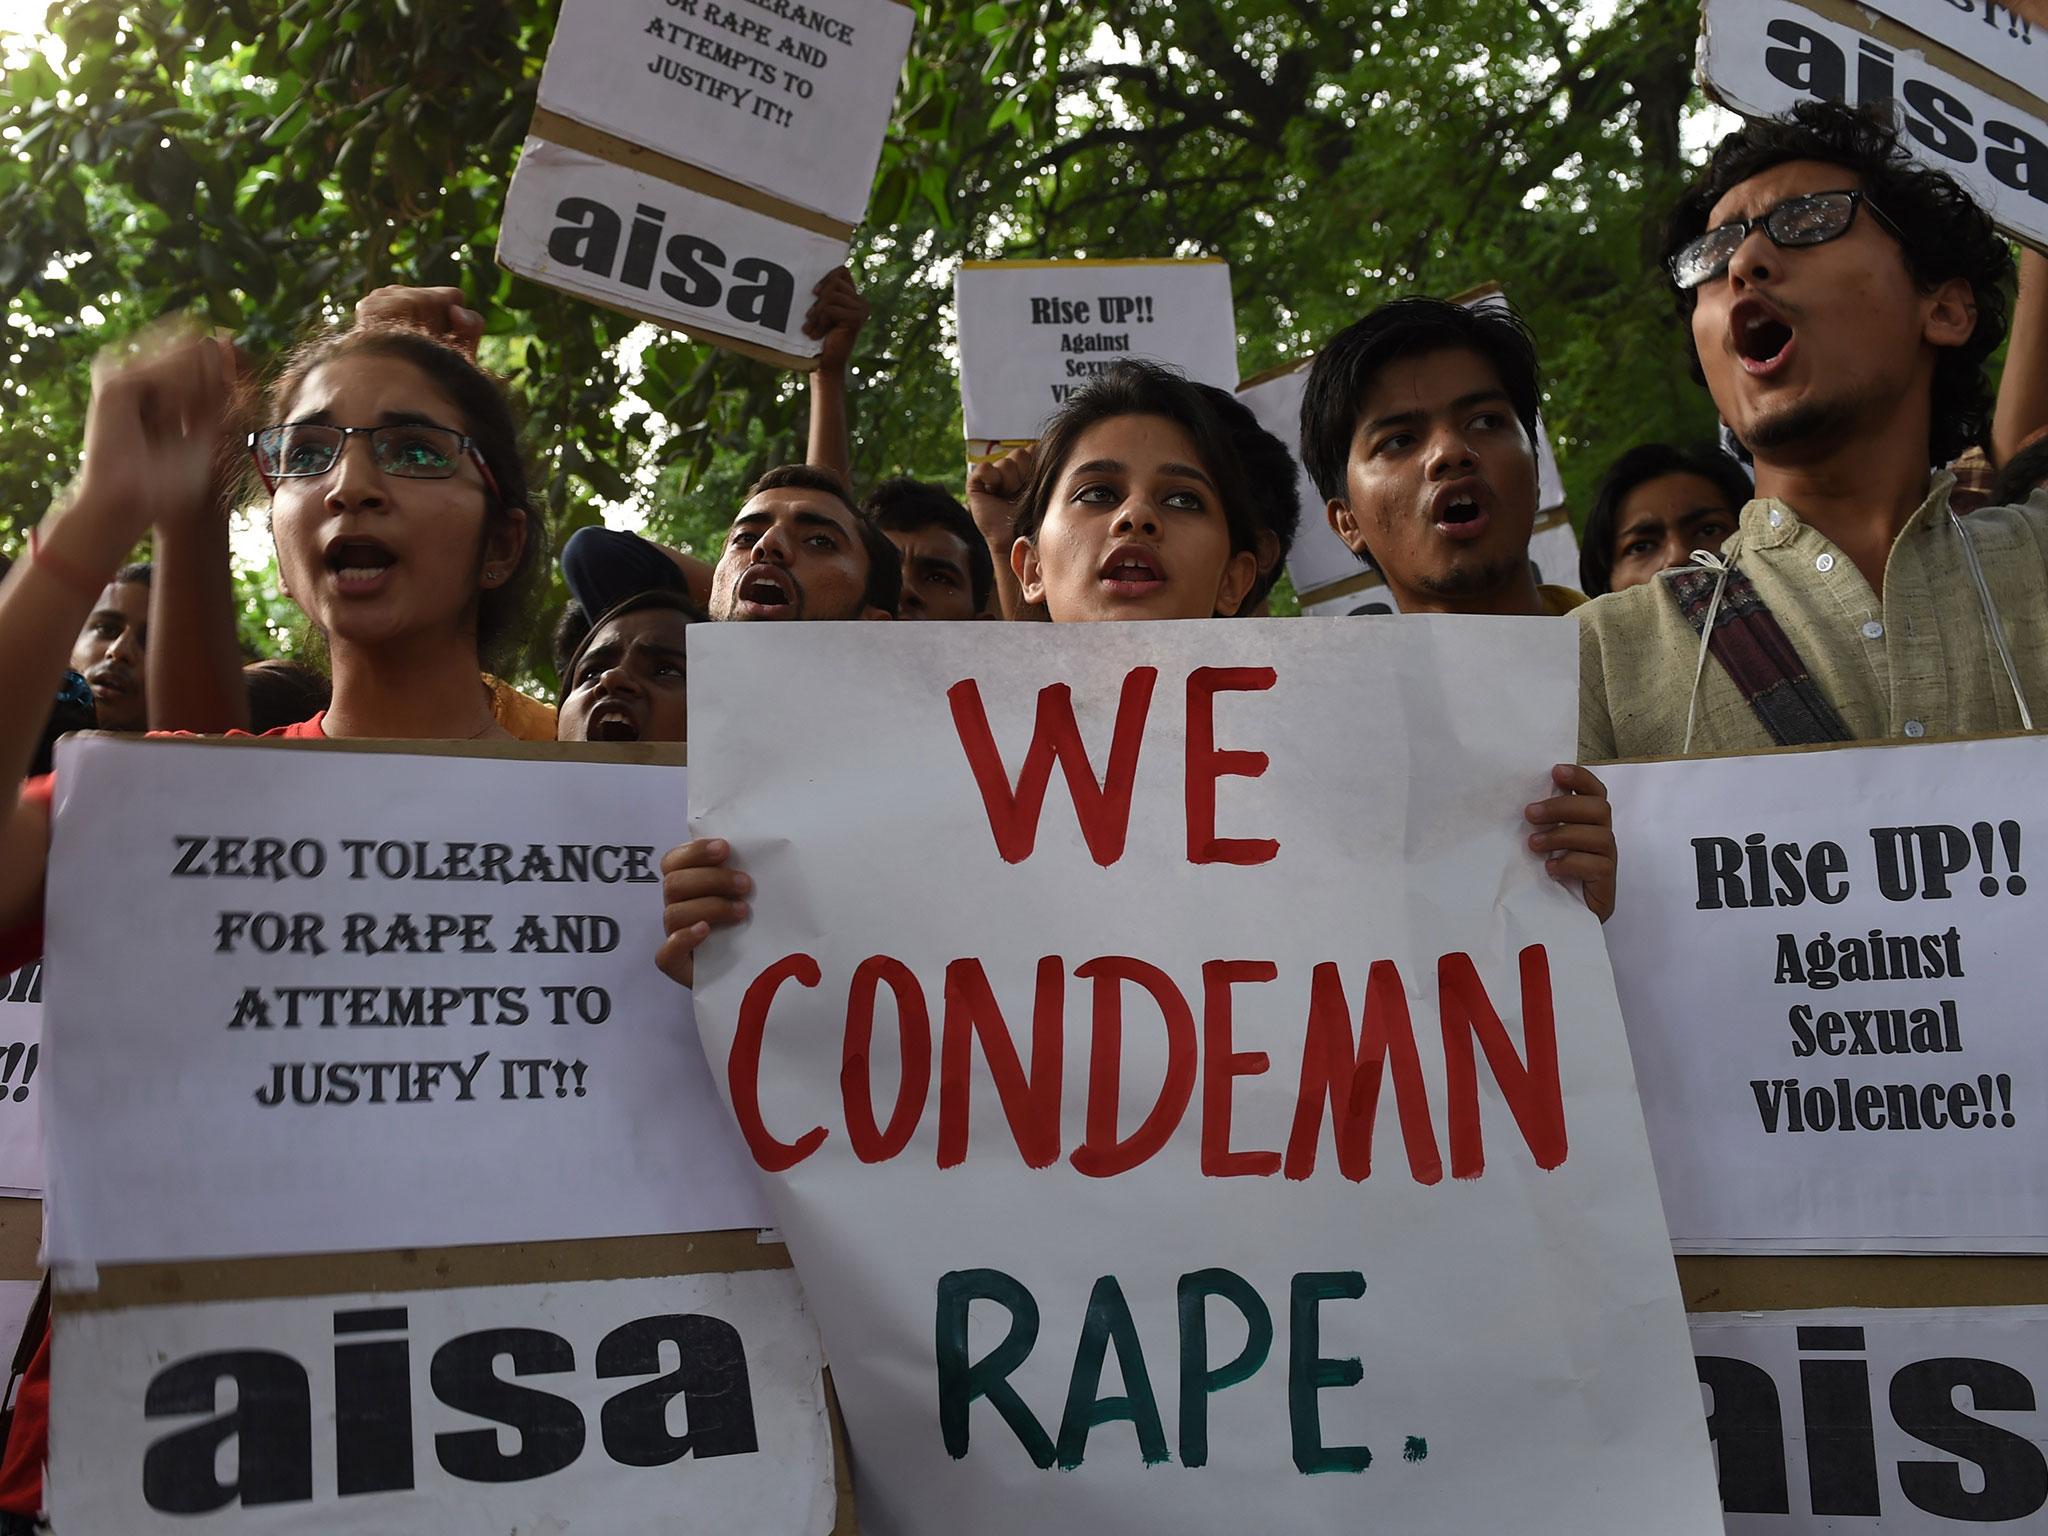 Gang Rape Sex In Forest - Gang rape' of student prompts arrests after video causes outcry in India |  The Independent | The Independent